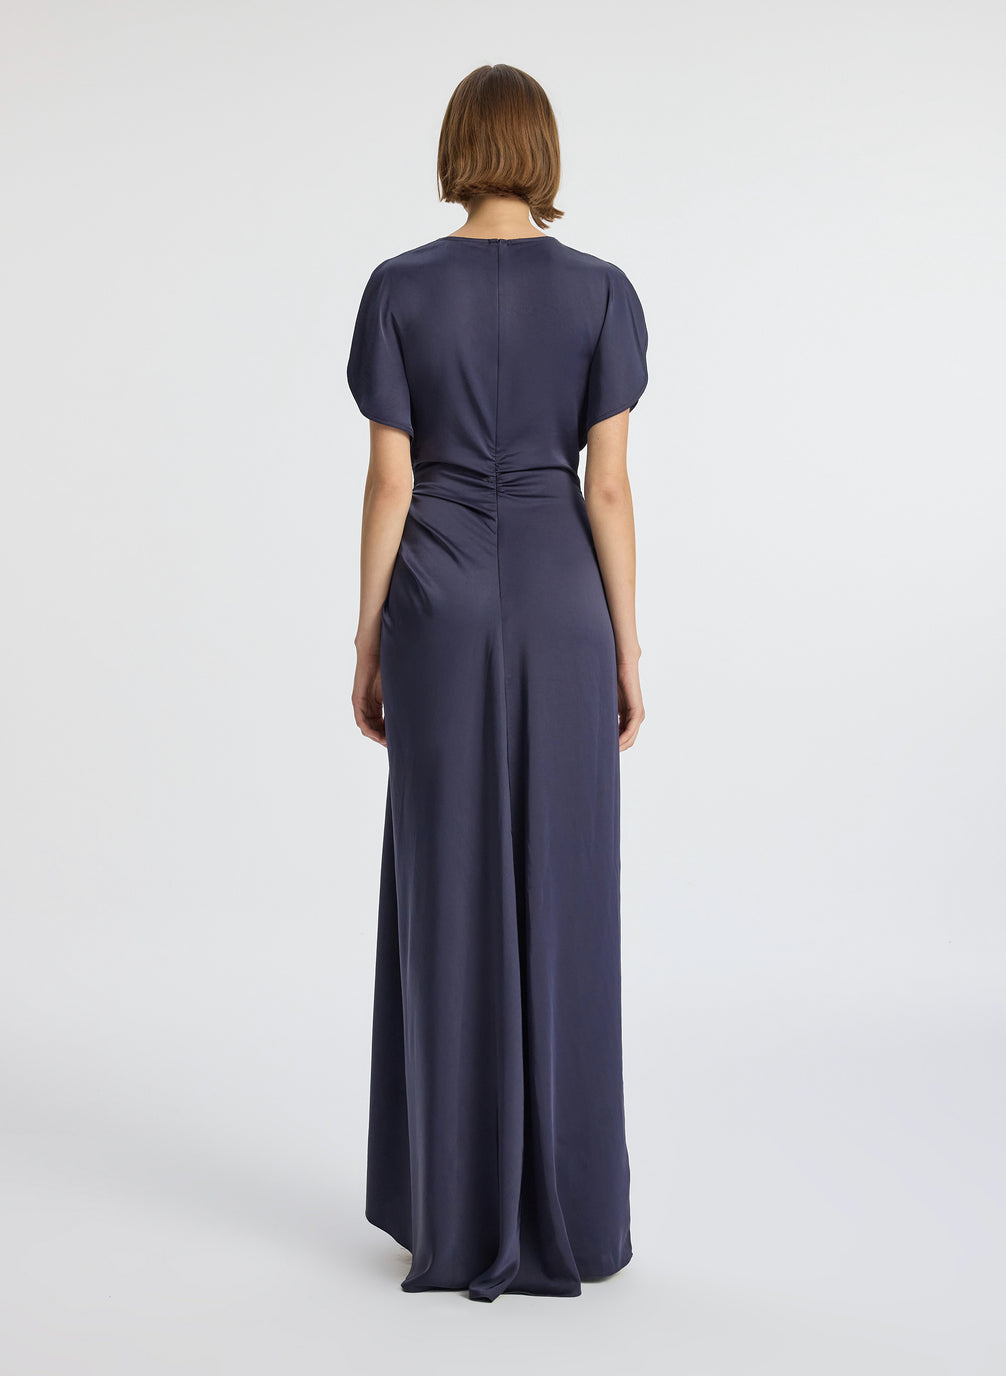 back view of woman wearing navy blue short sleeve satin gown